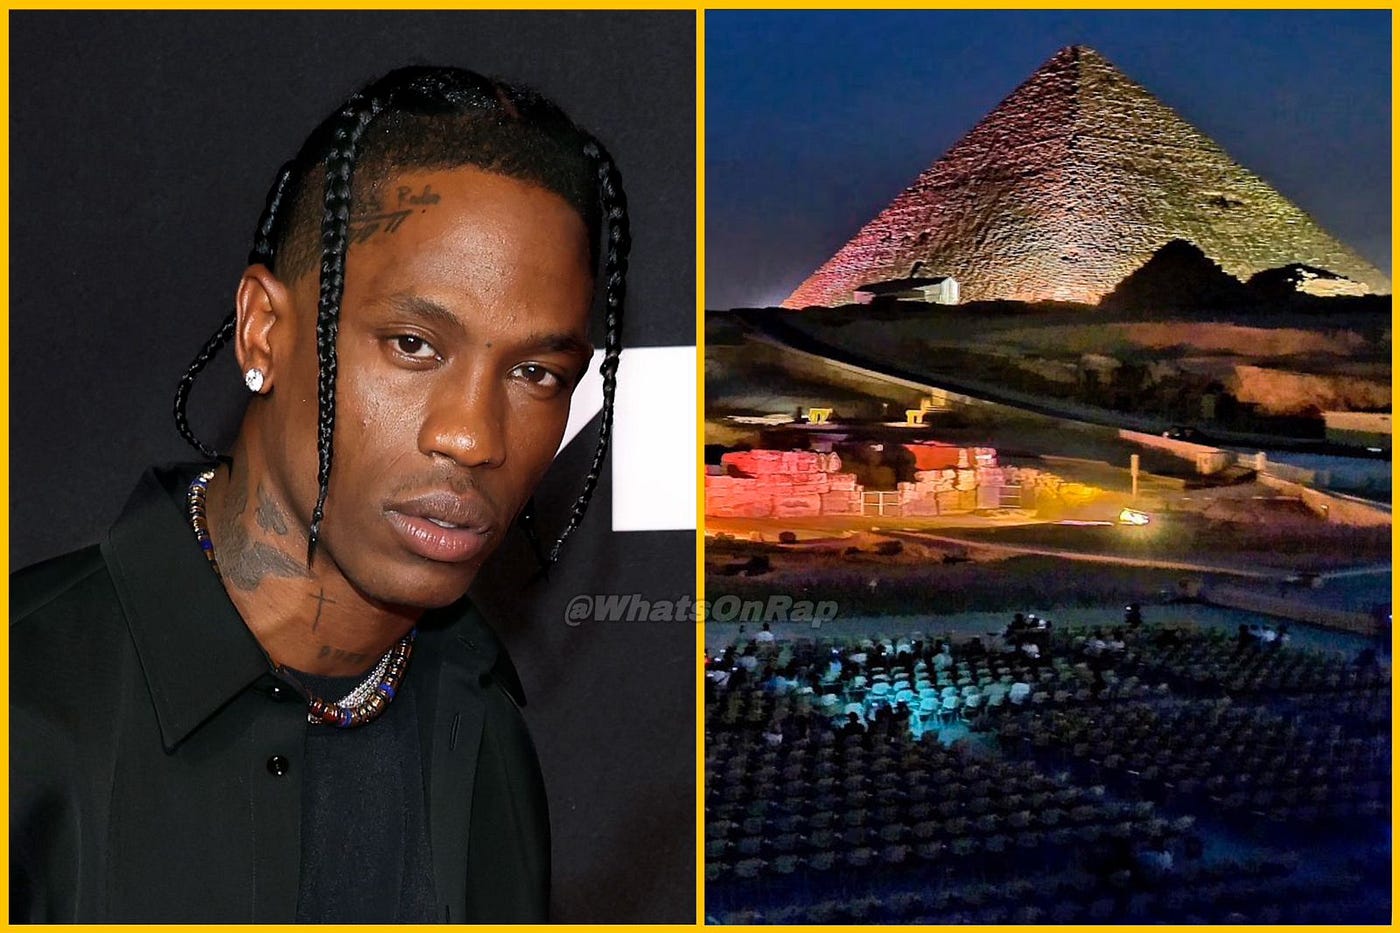 Travis Scott Utopia show at the Pyramids officially cancelled